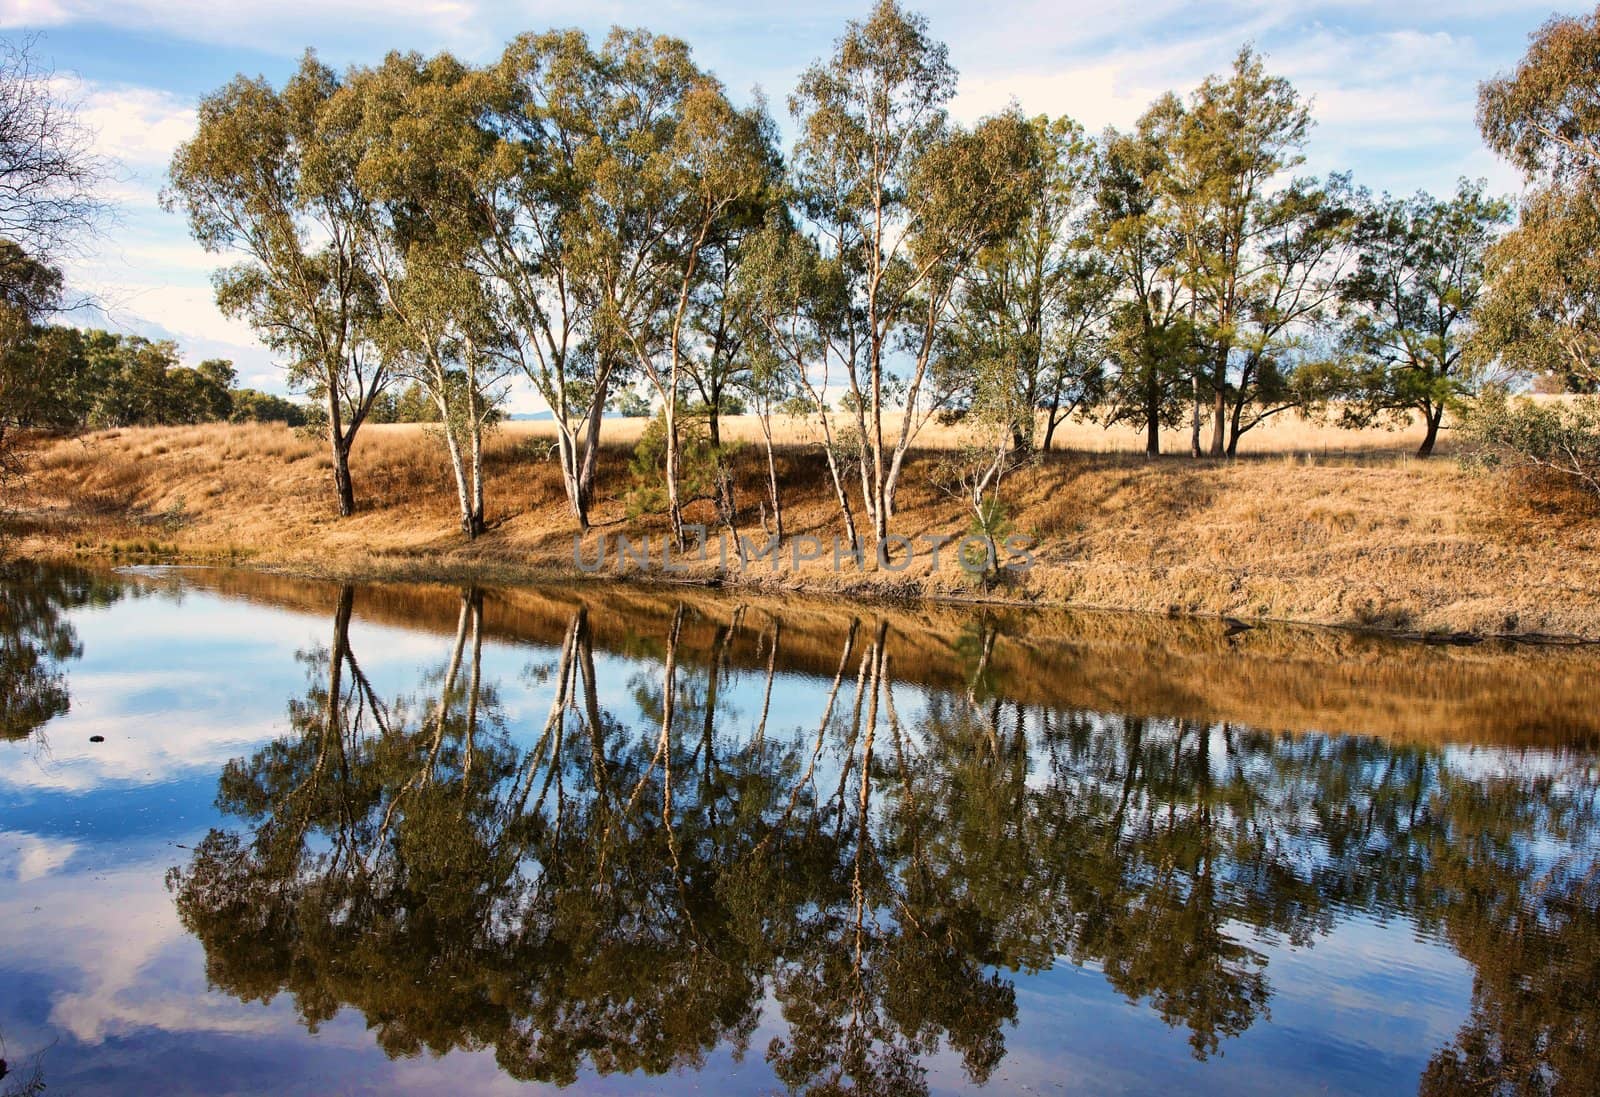 gum or eucalyptus trees reflecting in the river